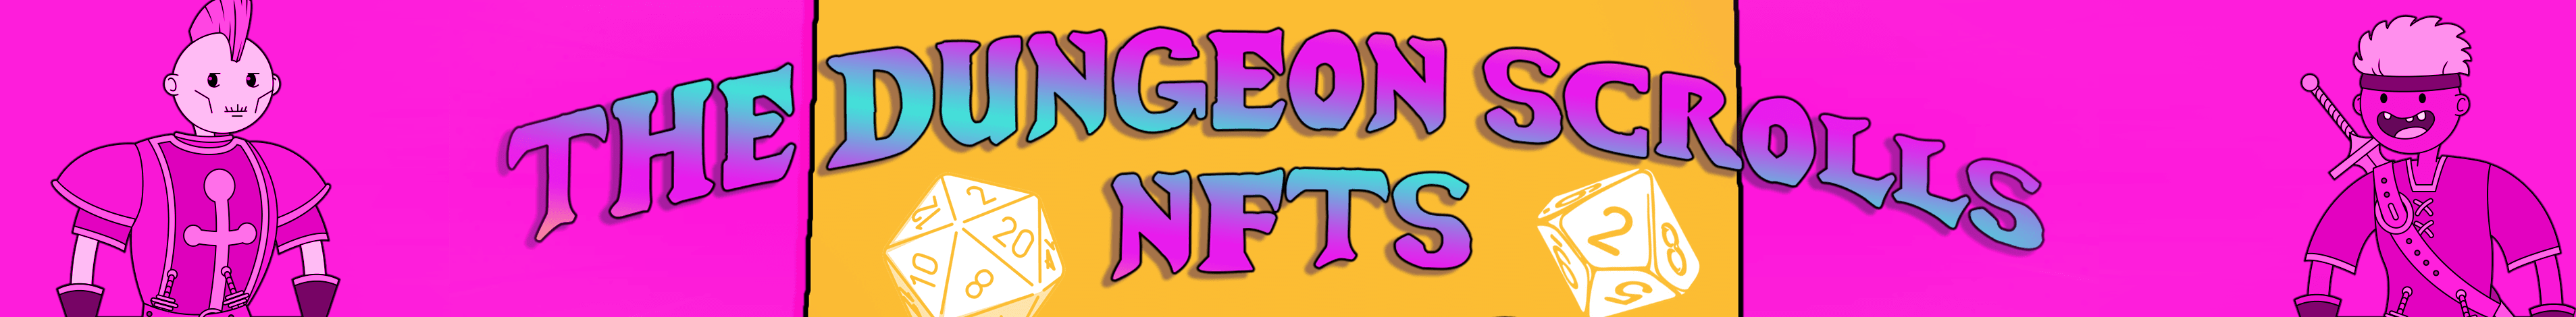 The Dungeon Scrolls NFTs